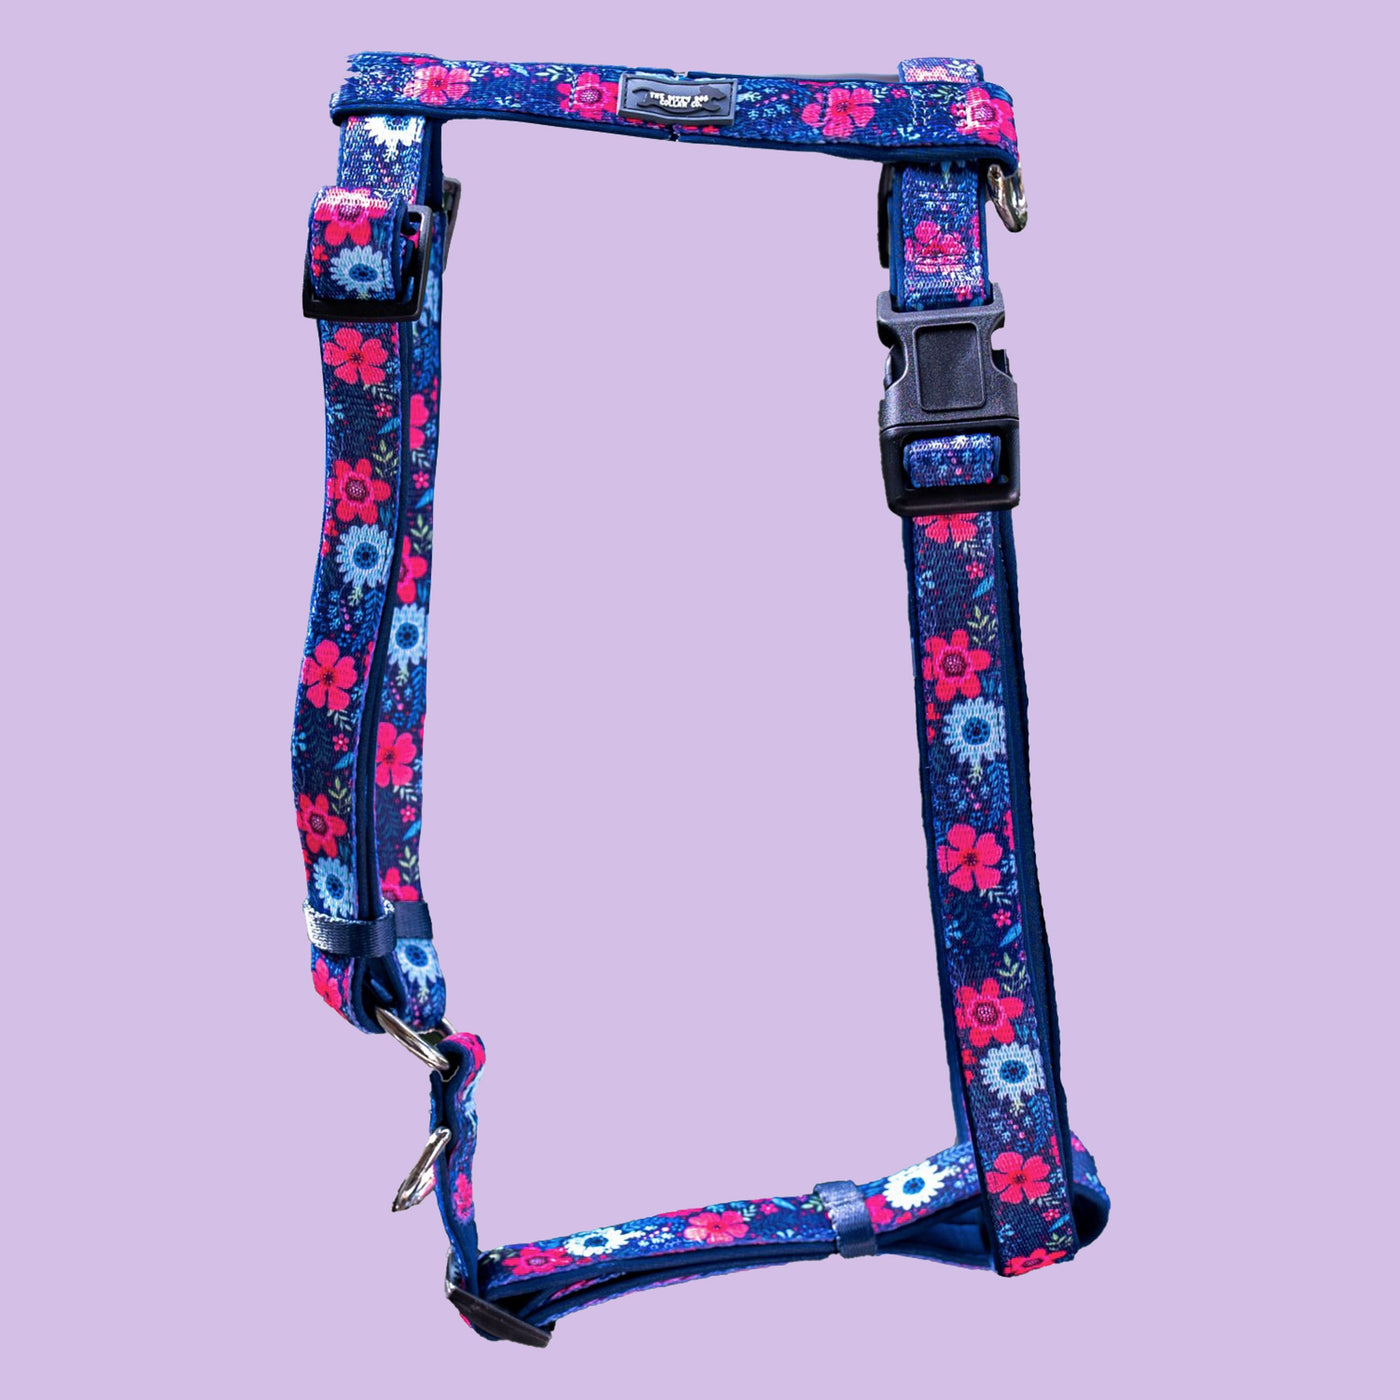 DOG HARNESS, Navy Floral- Fully Padded H-Harness, With Front & Back Attachment-Harness-Dizzy Dog Collars